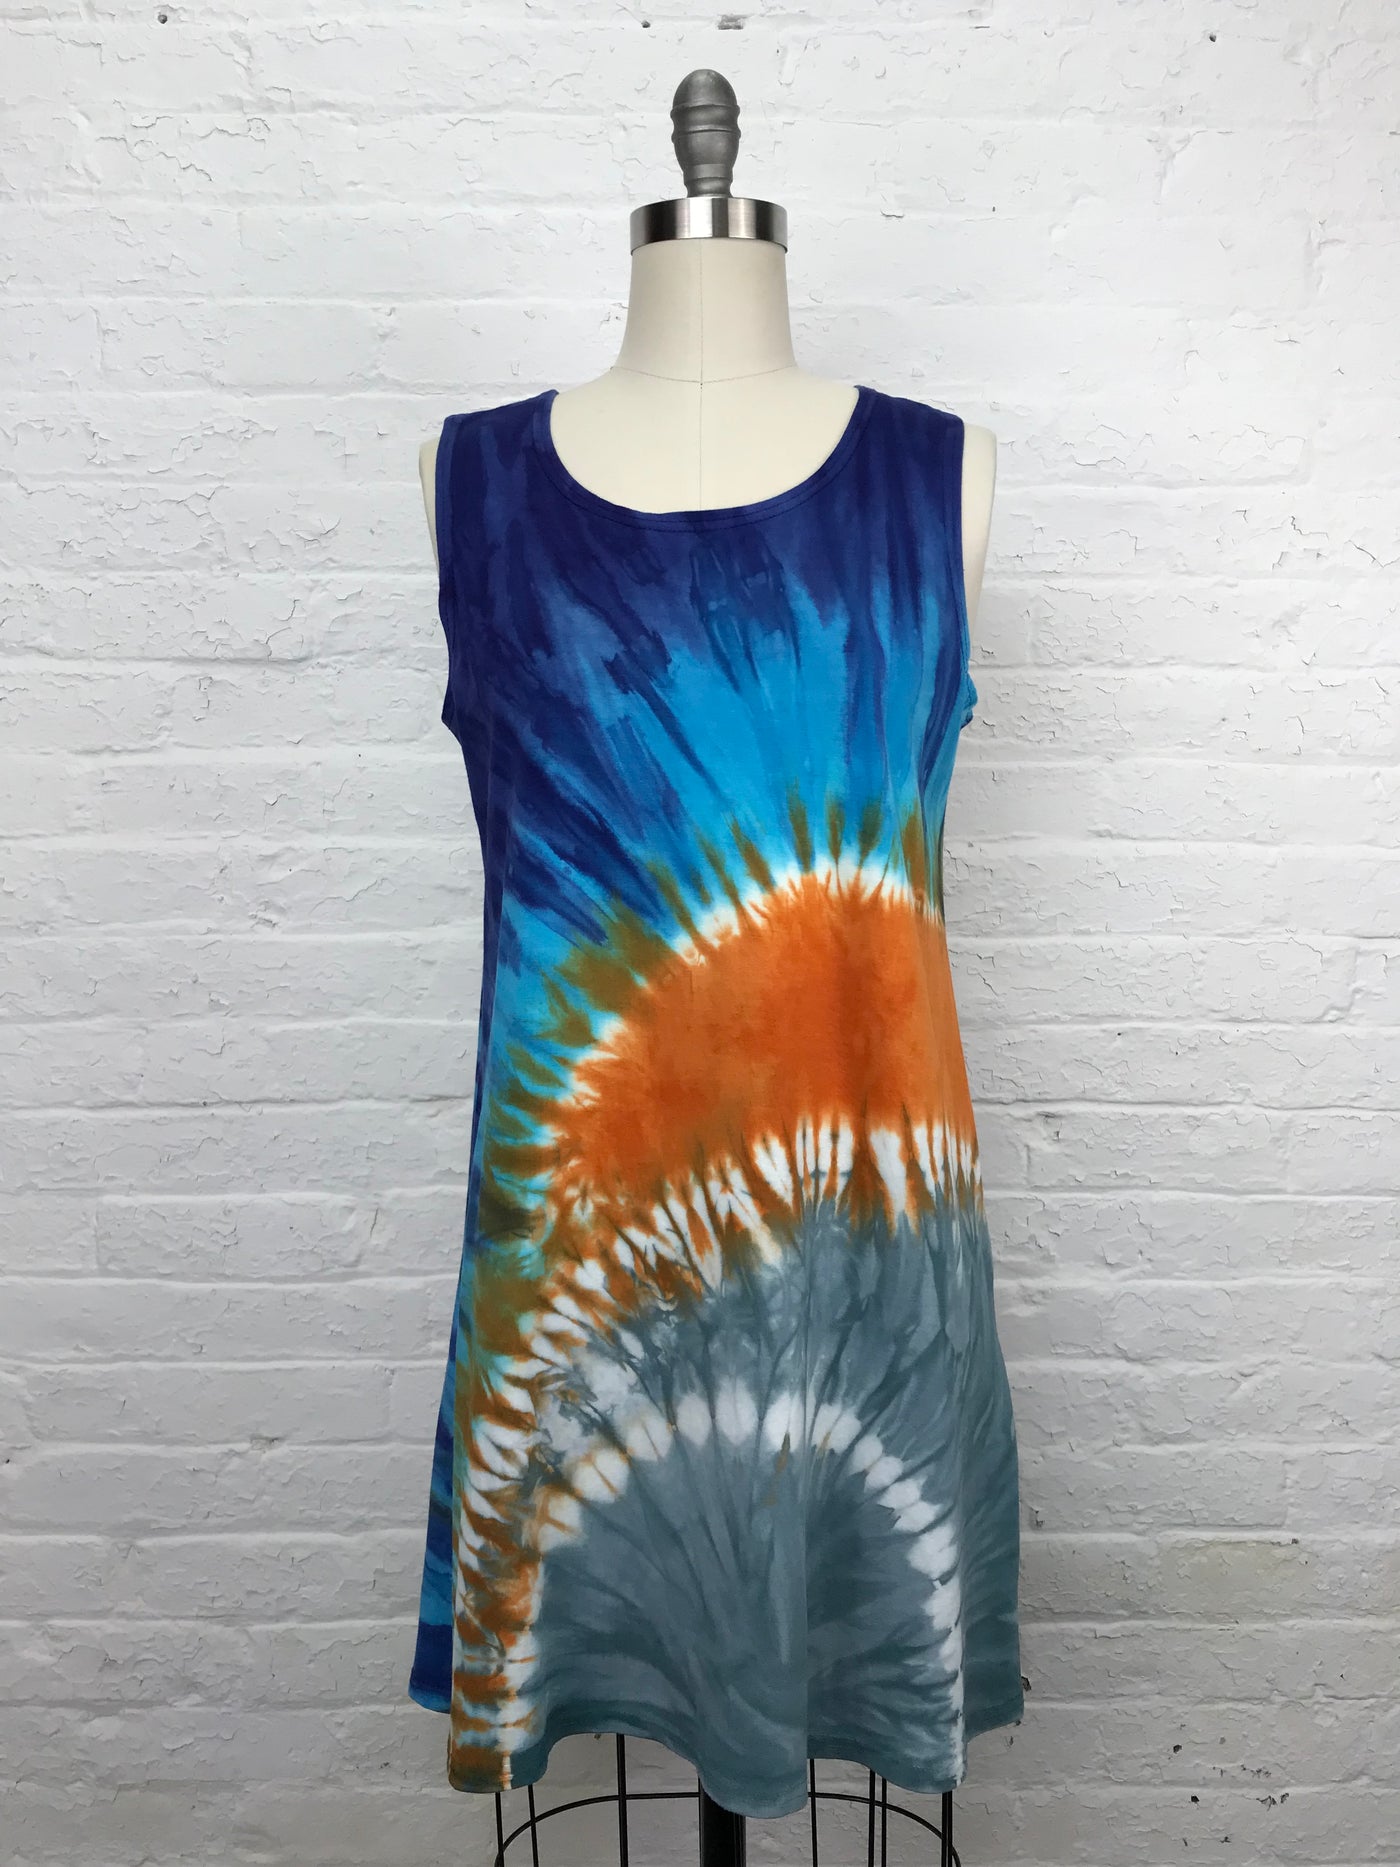 Eileen Mini Tank Tunic in Sunrise Over Clouds - front view